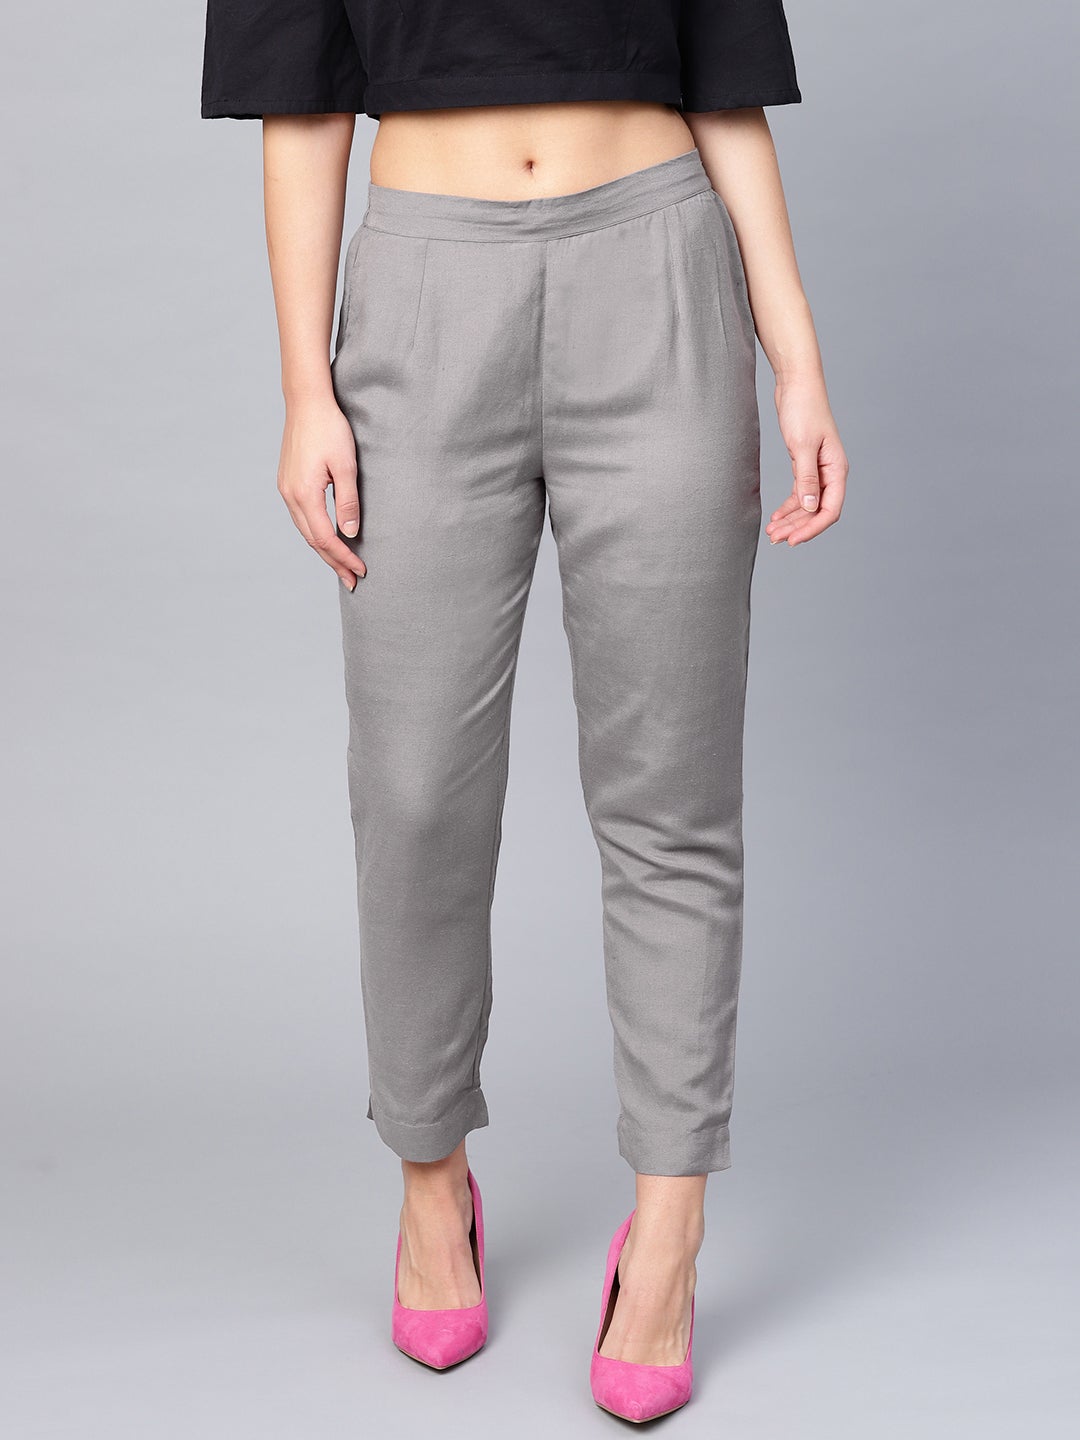 Juniper Grey Solid Rayon Flex Slim Fit Women Pants With Two Pockets